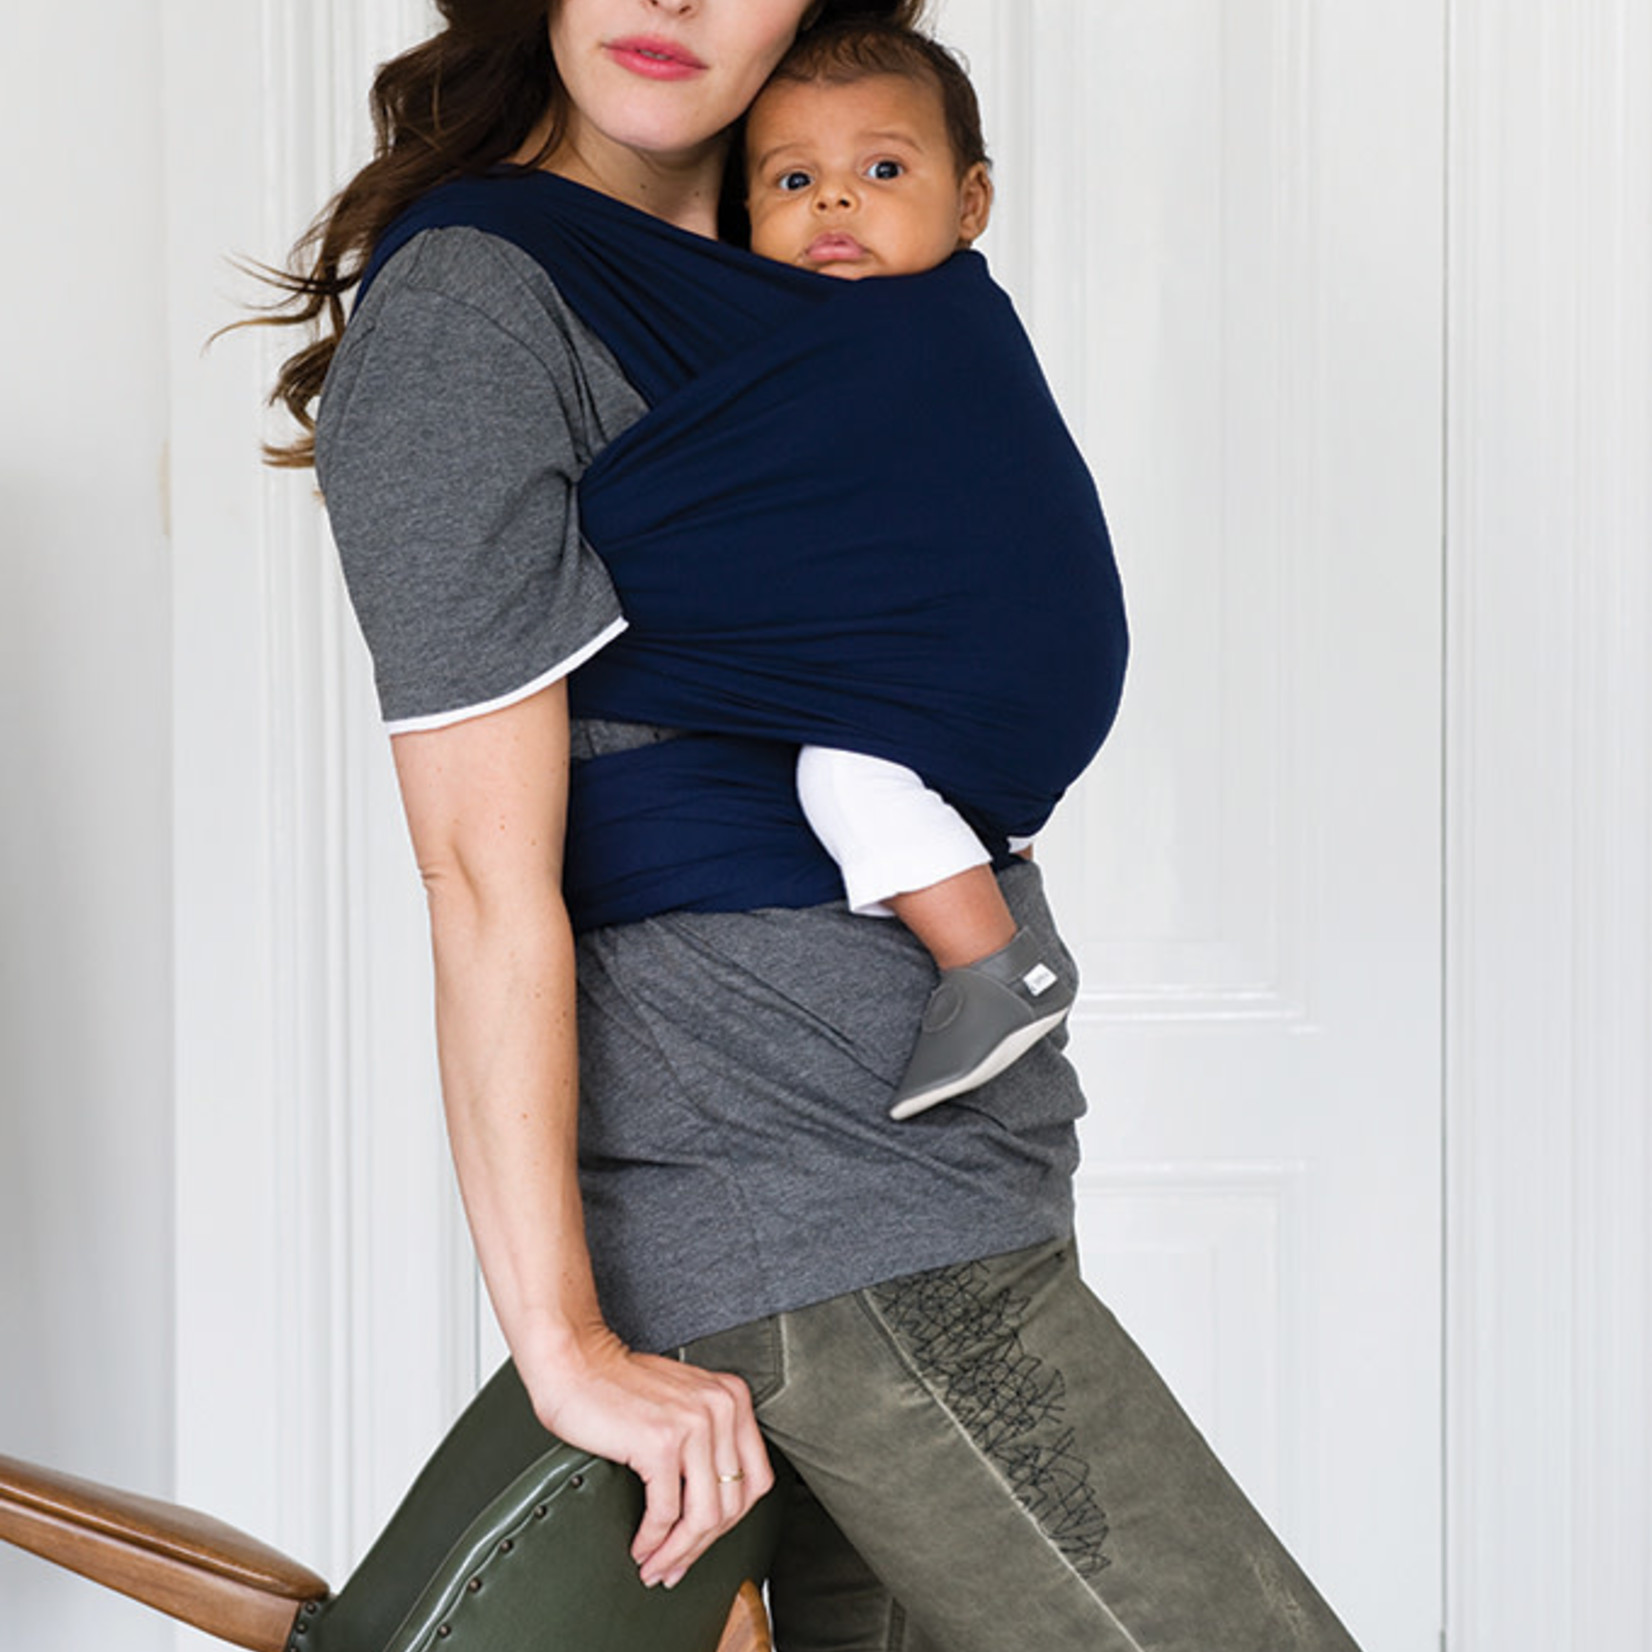 Babylonia baby carriers Babylonia baby carriers - Tricot-Slen Cool - Navy blue - One size